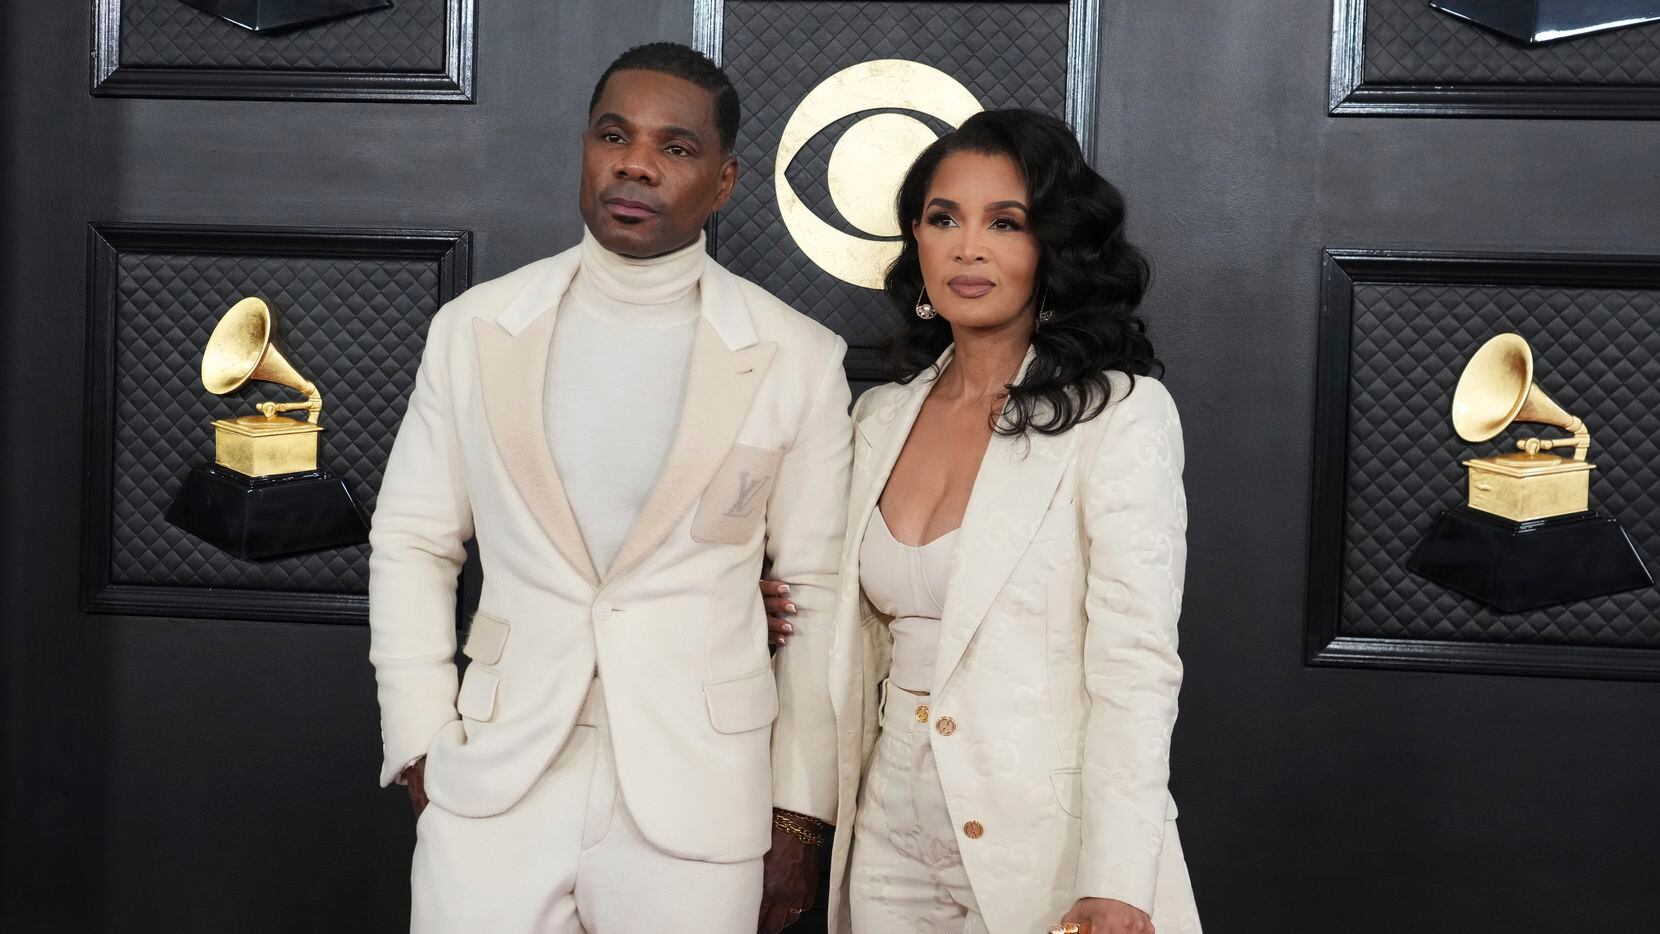 Kirk Franklin, left, and Tammy Collins arrive at the 65th annual Grammy Awards on Sunday,...